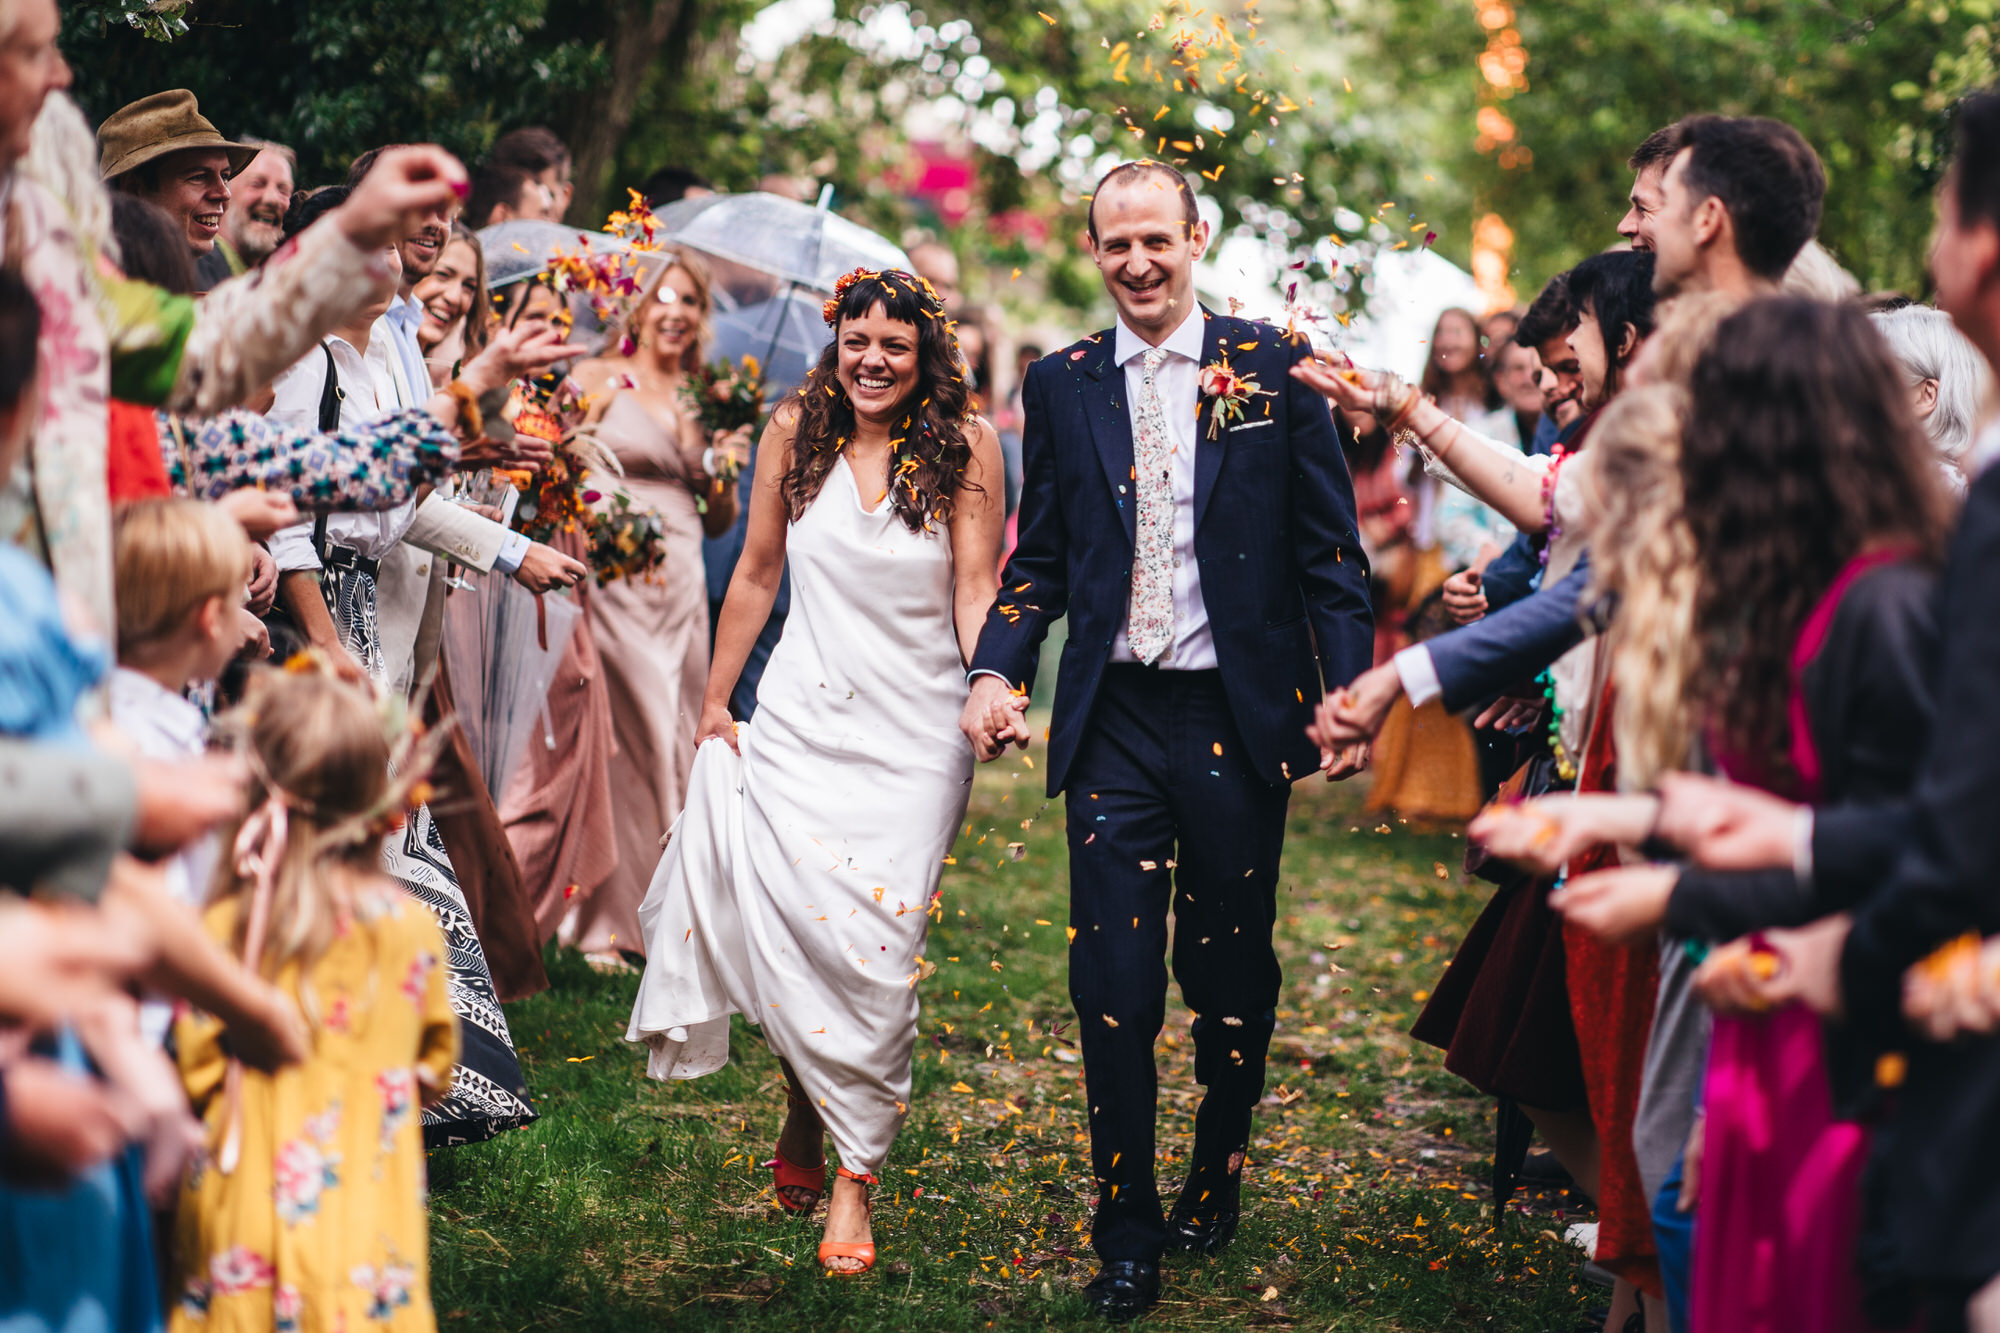 guests throw confetti at the bride and groom